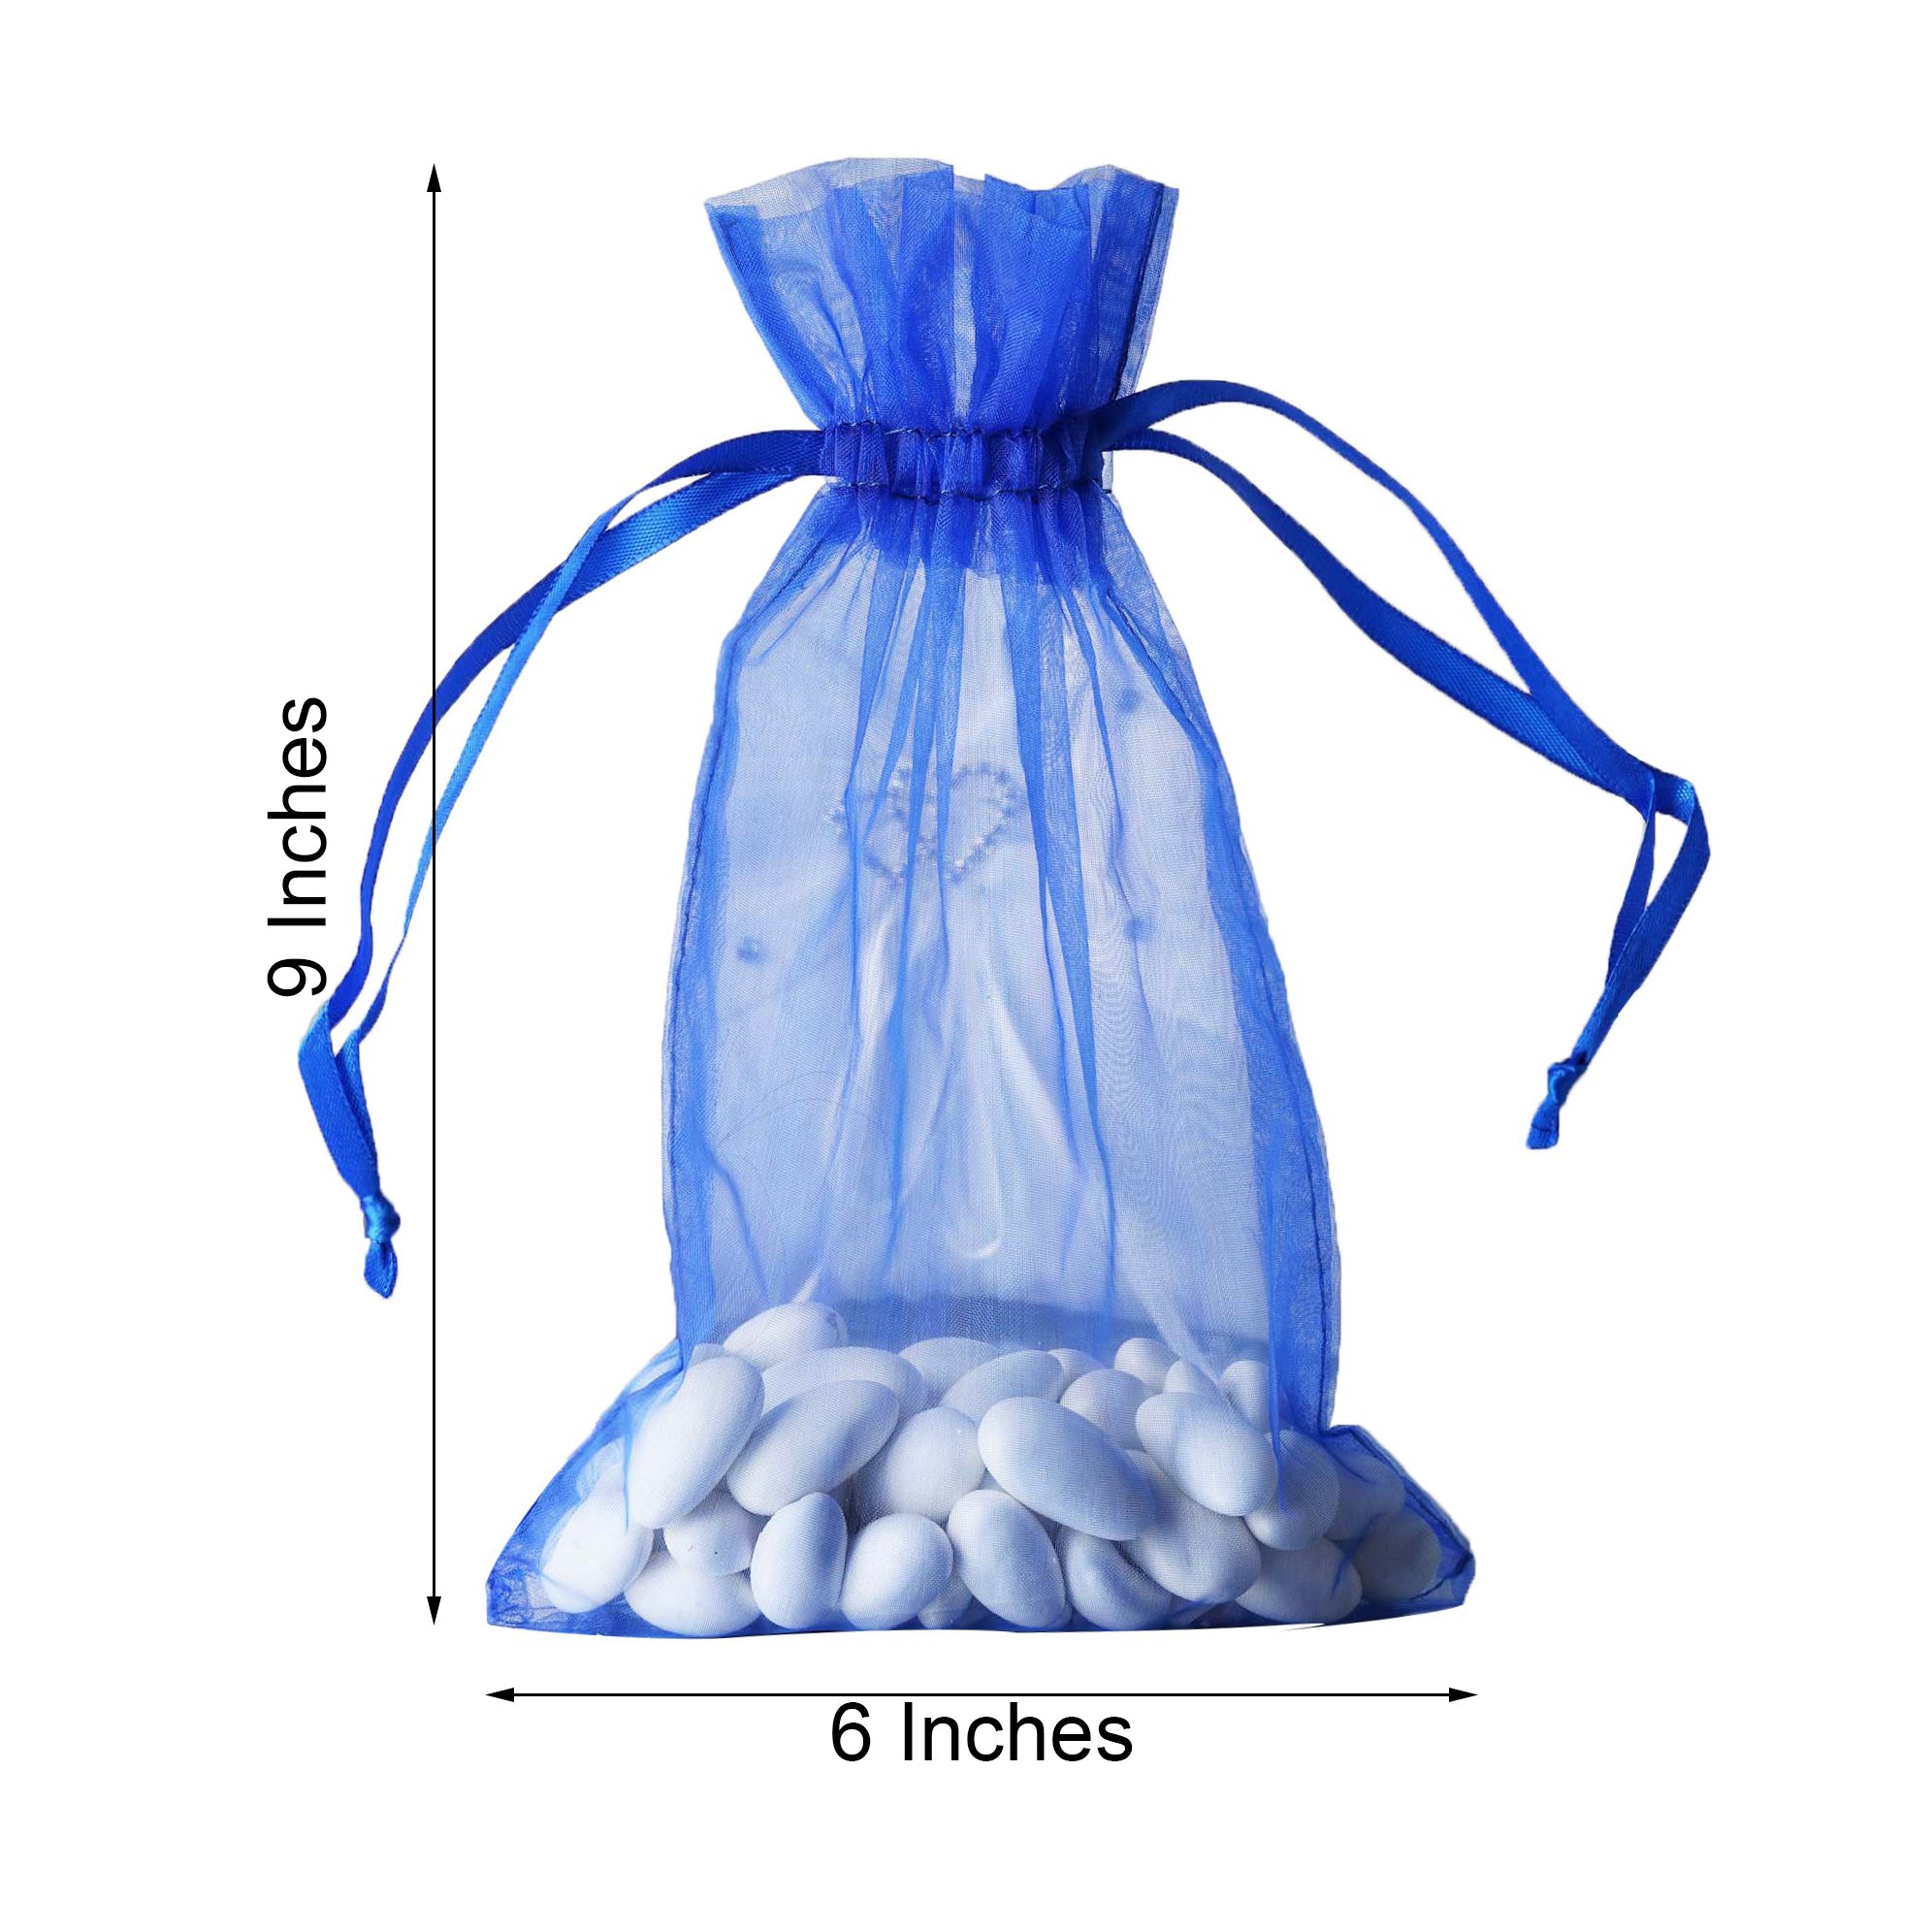 Efavormart 50PCS ROYAL BLUE Organza Gift Bag Drawstring Pouch Wedding Favors Bridal Shower Treat Jewelry Bags - 6"x9" - image 5 of 7